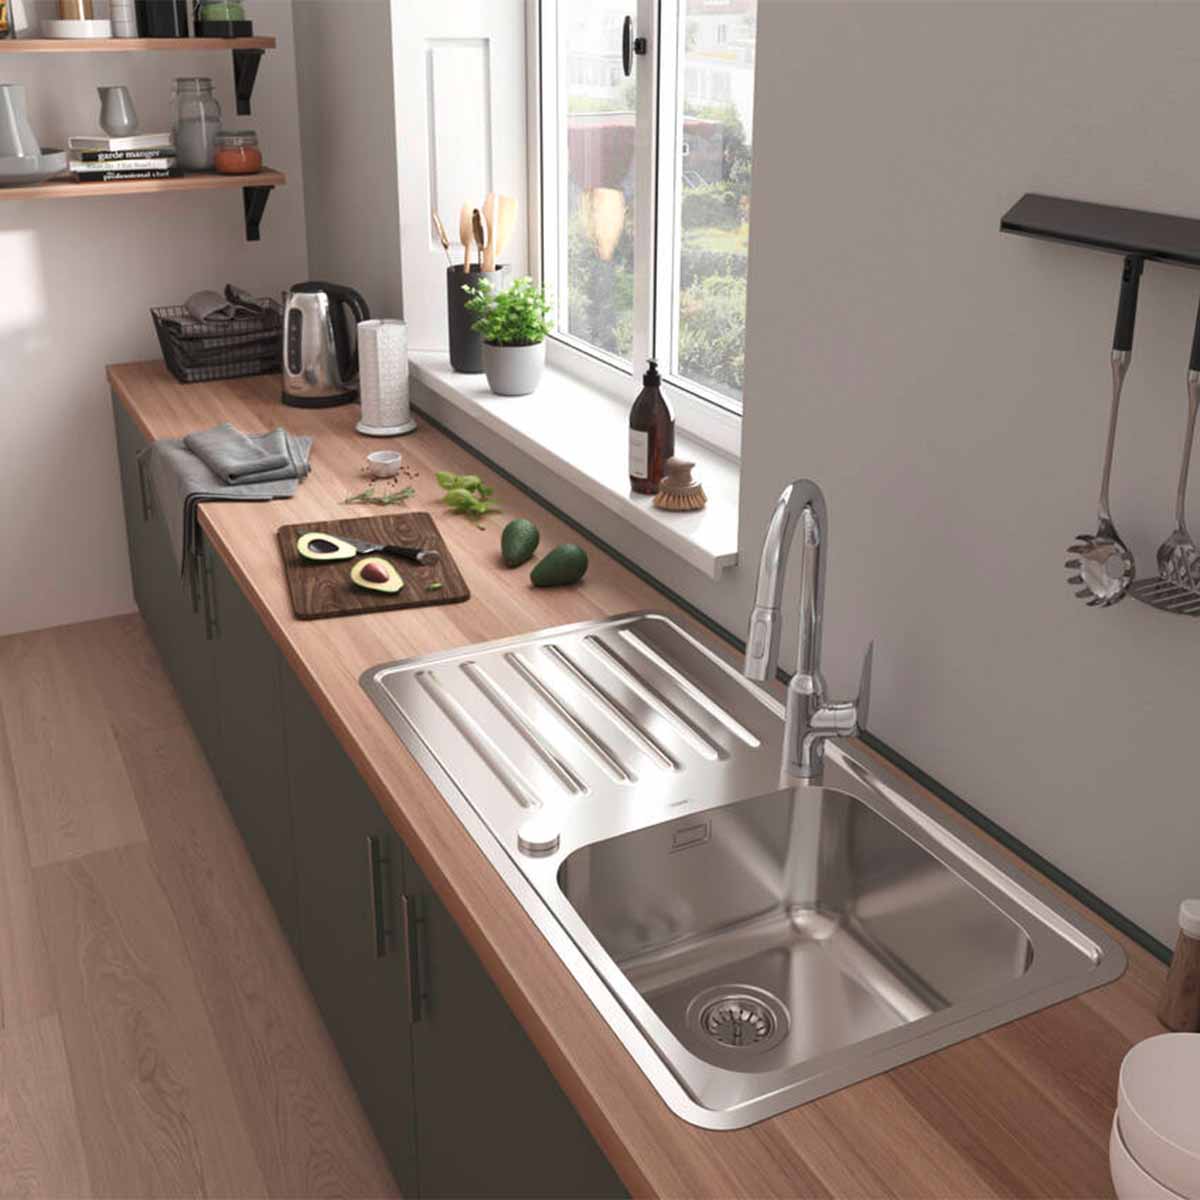 Hansgrohe S41 S4113 F400 top flush mounted 2 hole double bowl kitchen sink automatic waste lifestyle